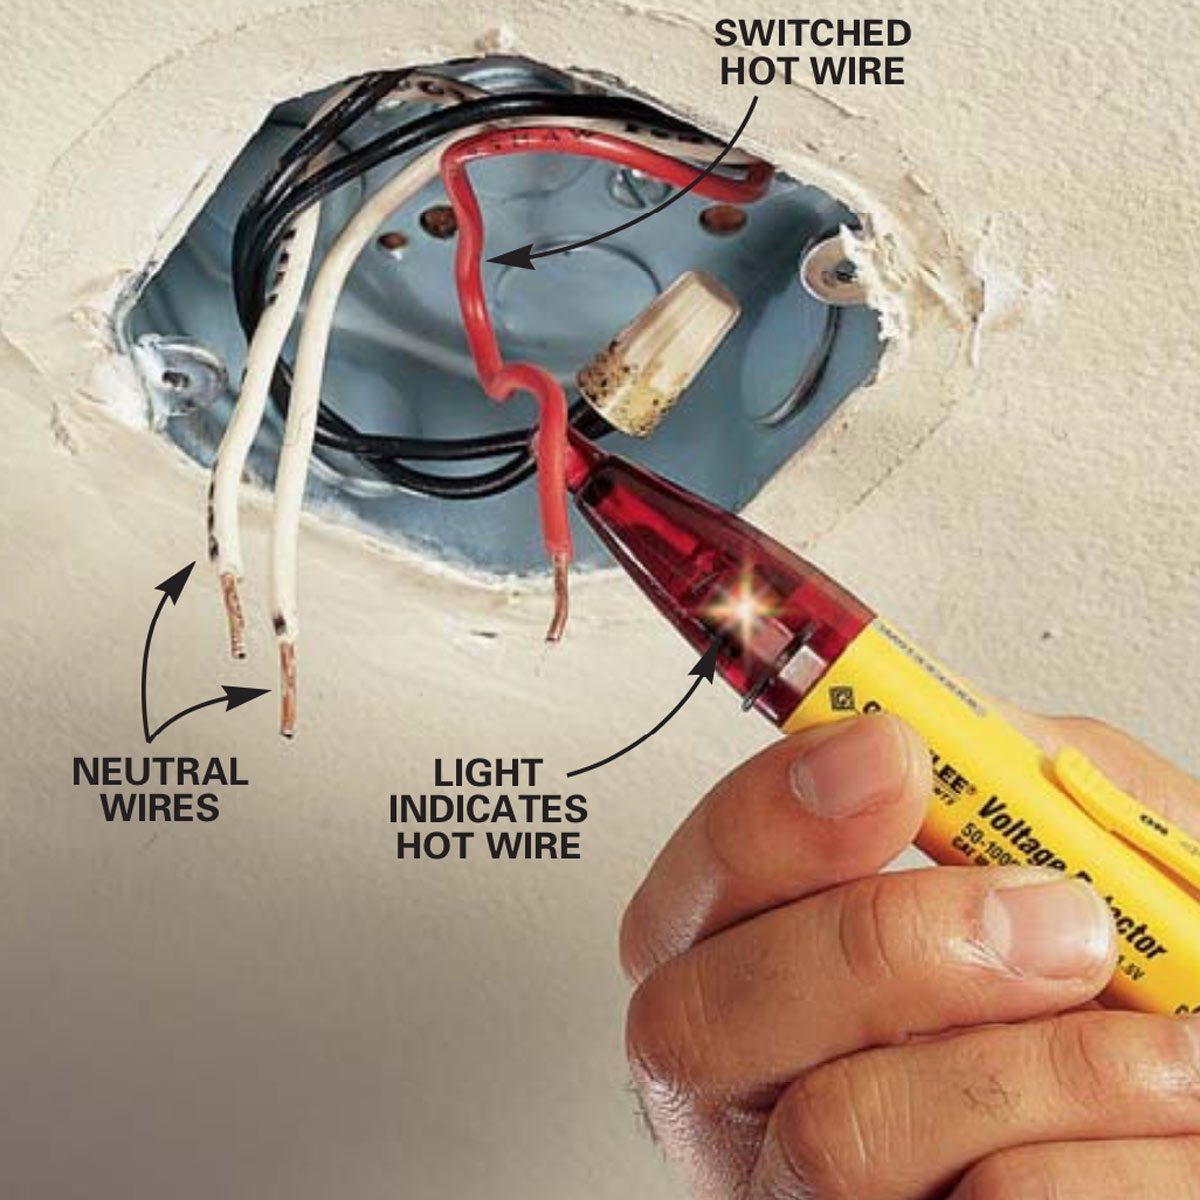 Ceiling power cords  Ceiling outlet, Ceiling, Electrical layout